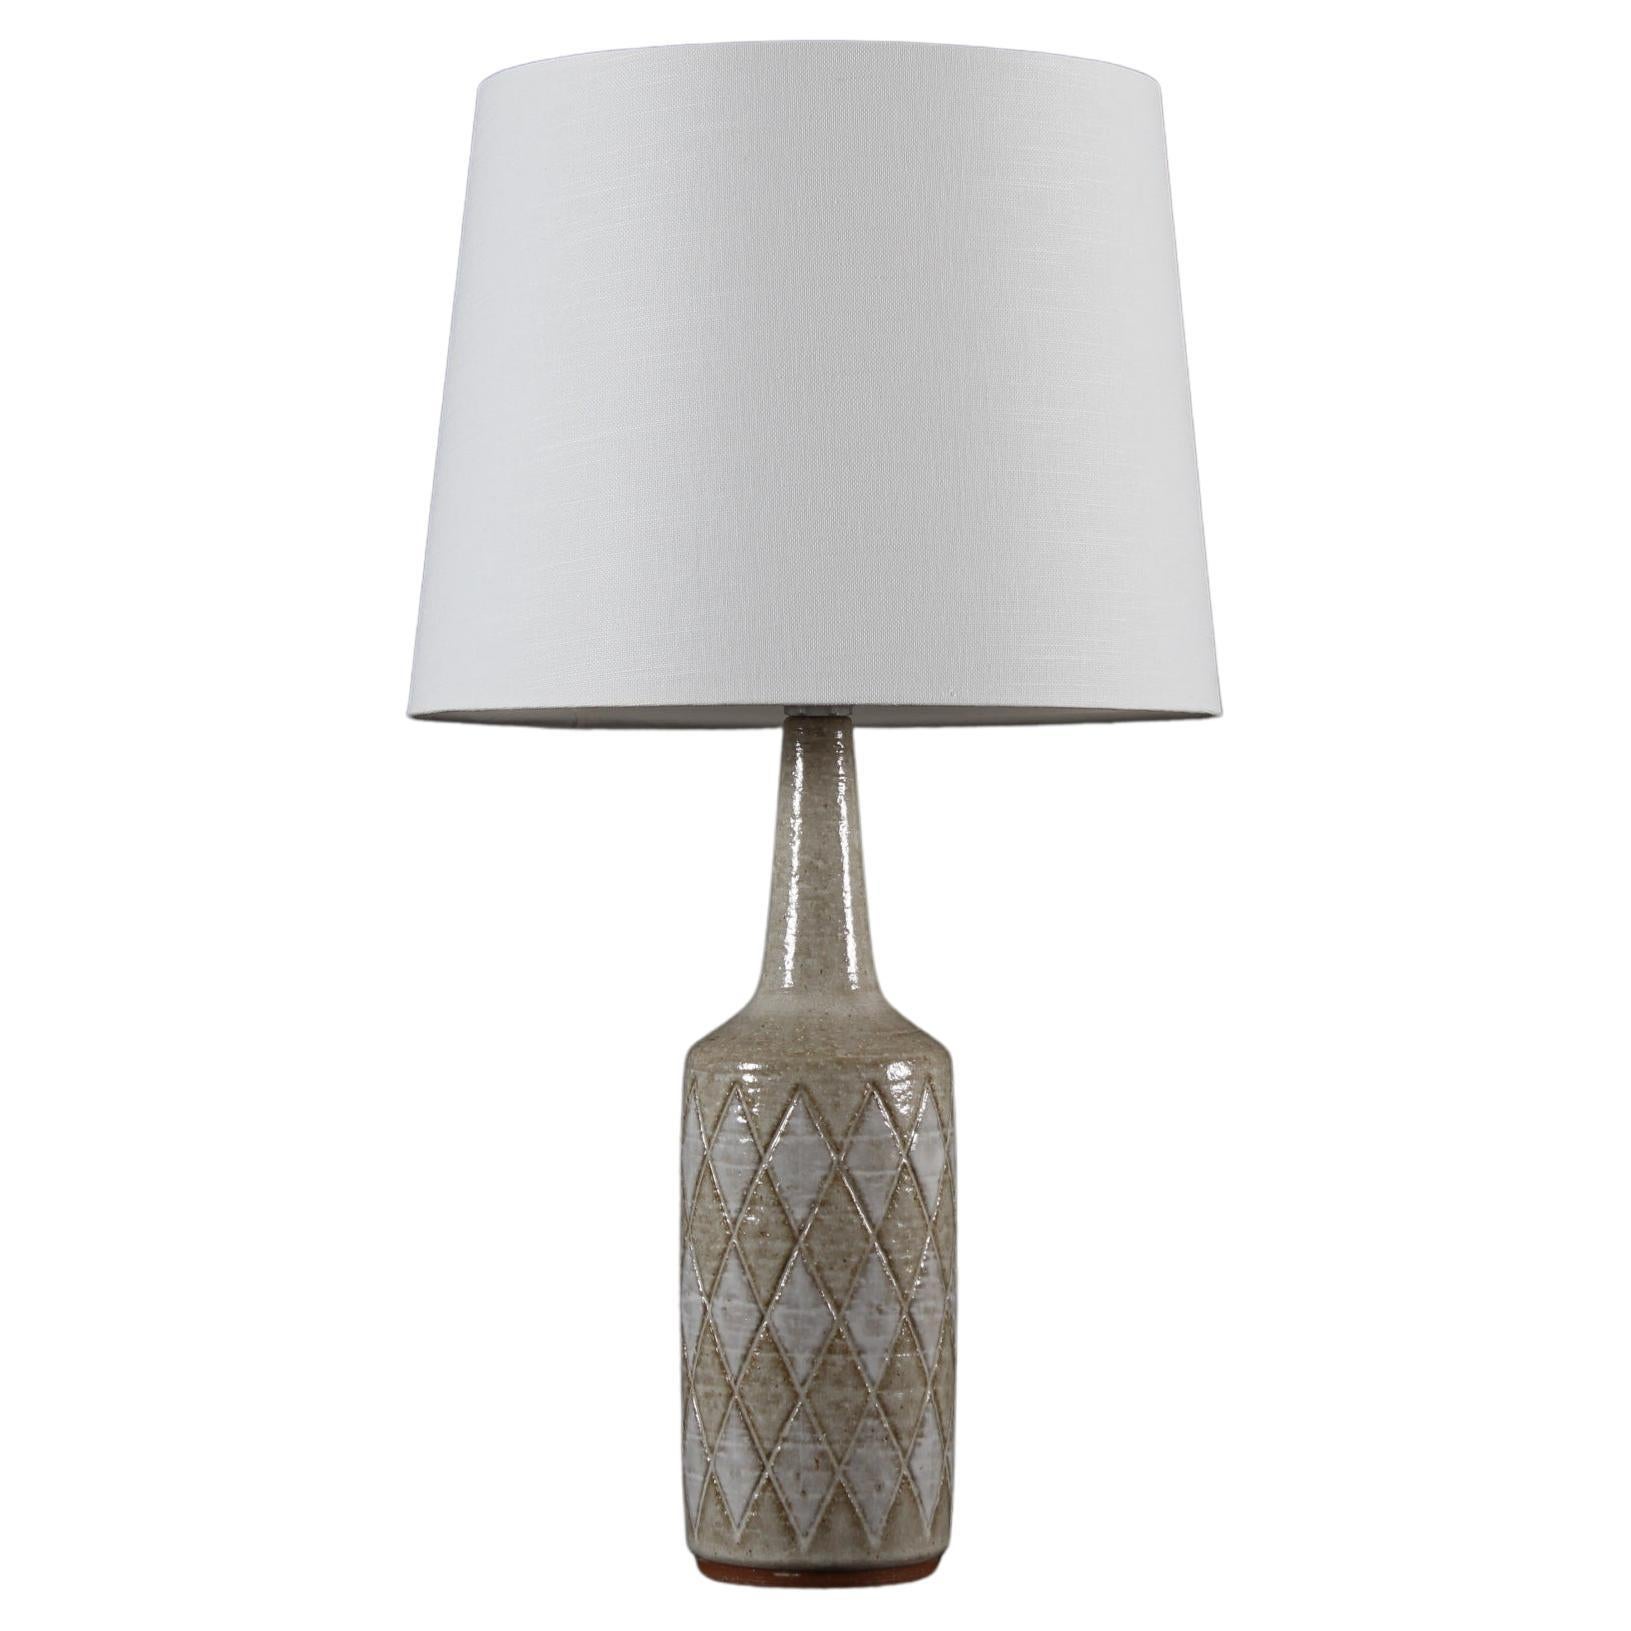 Danish Palshus Table Lamp with Harlequin Checkered Decoration and New Lamp Shade